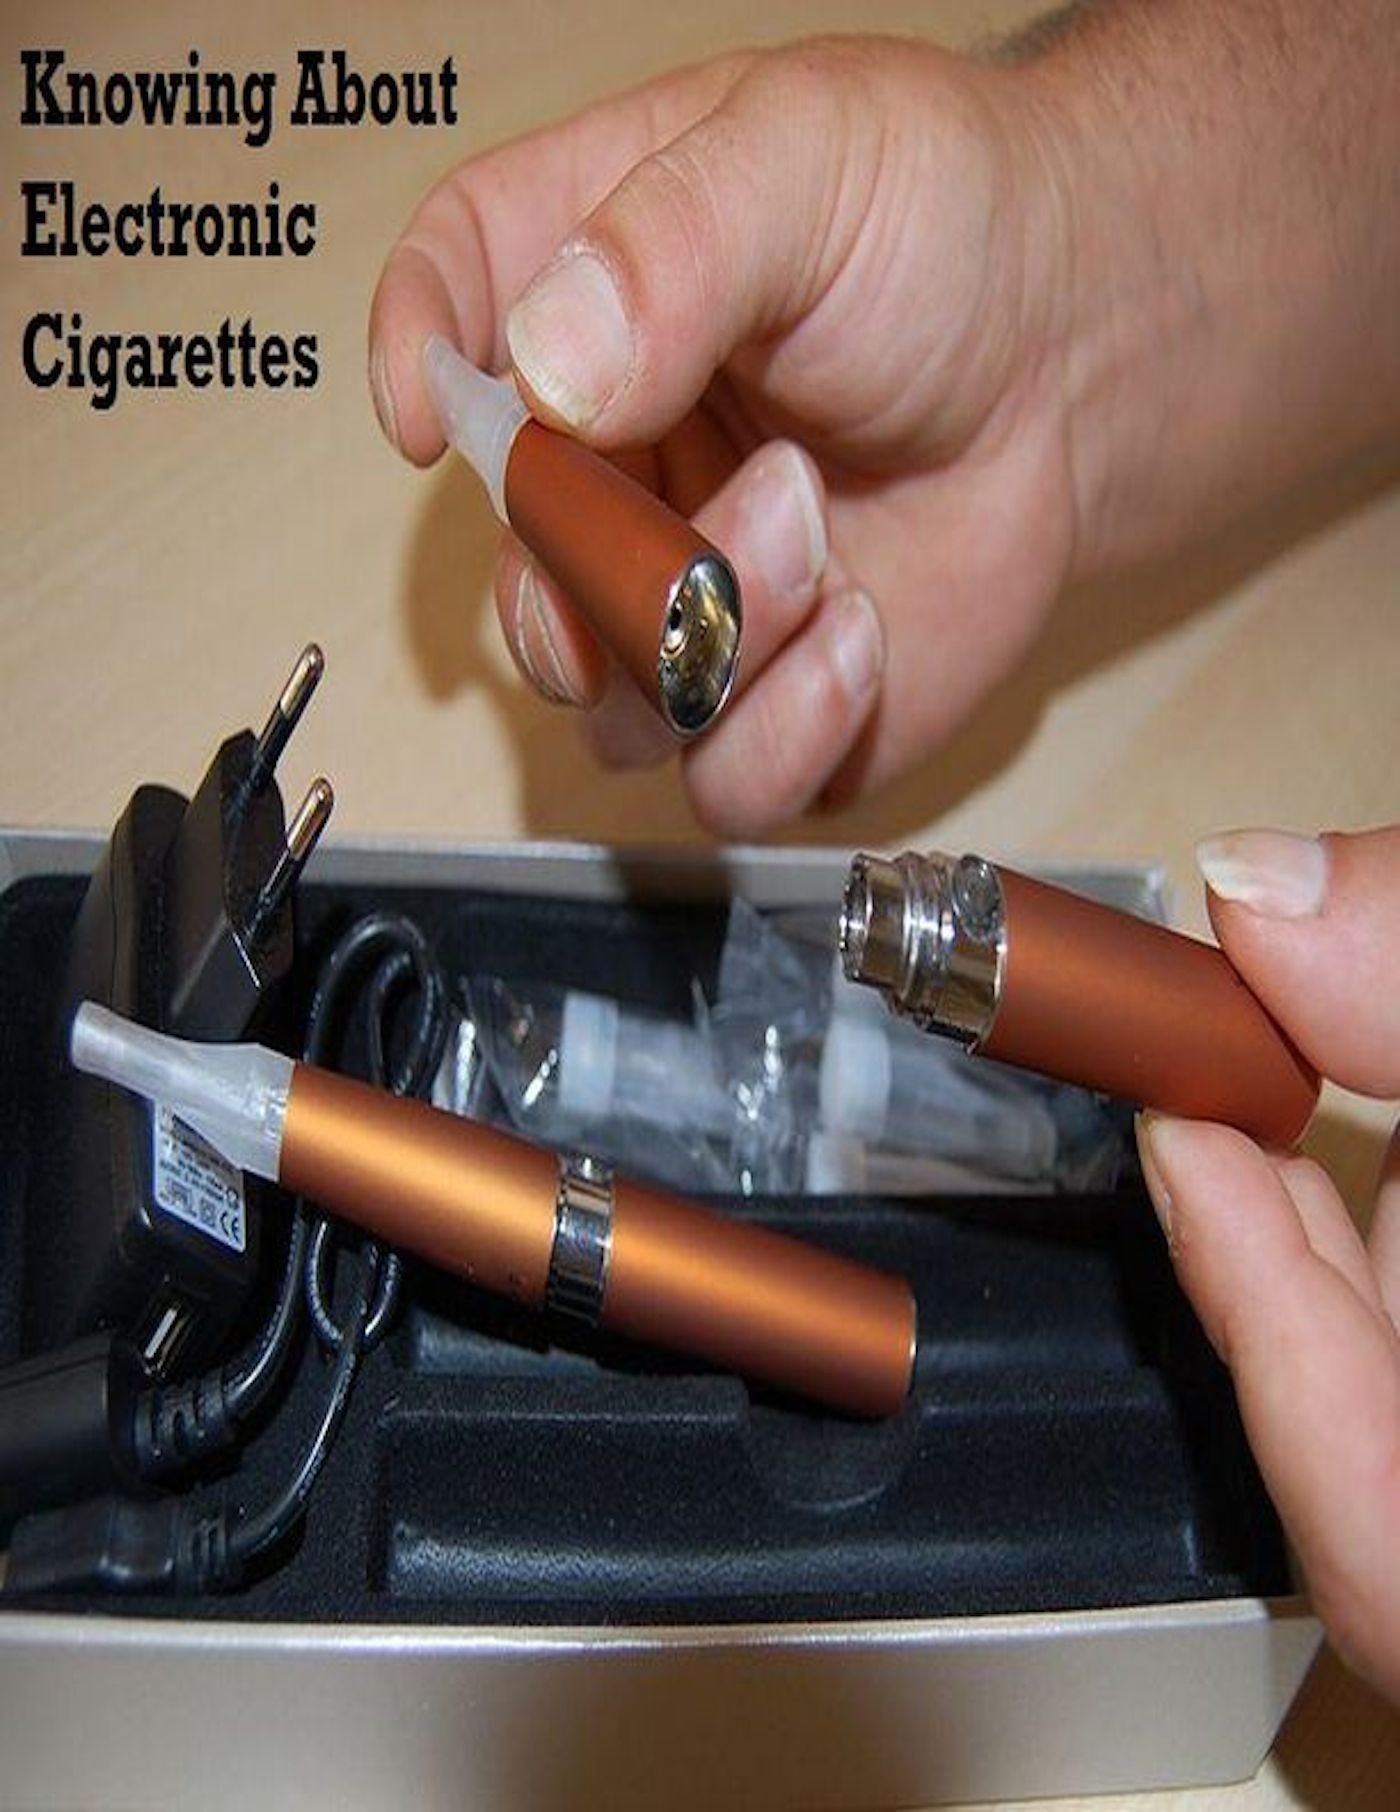 Knowing About Electronic Cigarettes